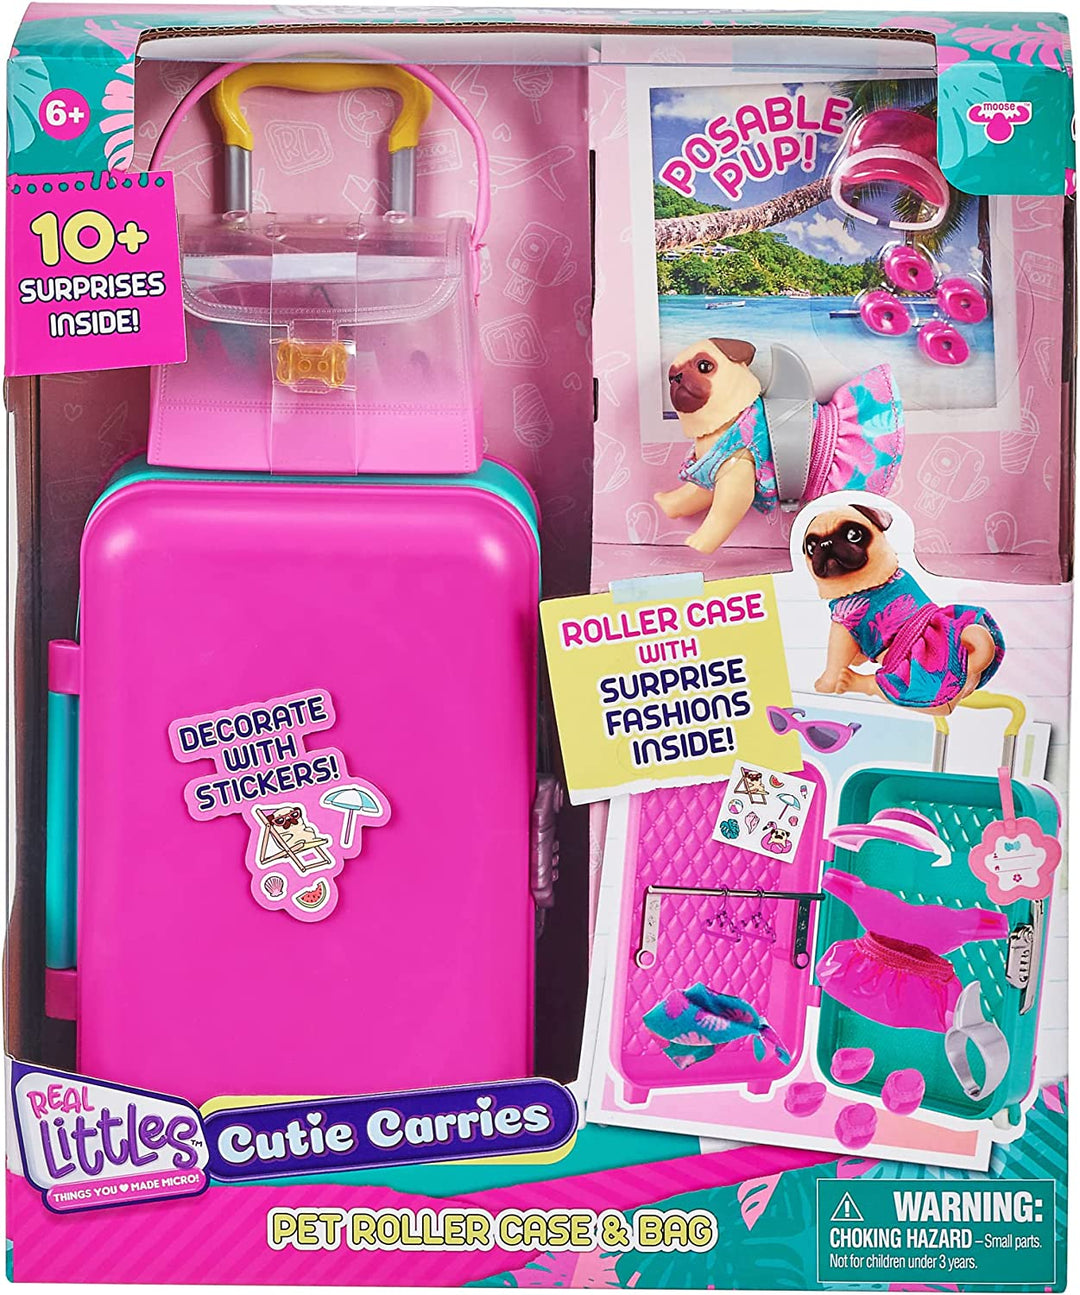 Real Littles 25392 Collectible Suitcase, Carrier with 1 Puppy and 12 Micro Worki